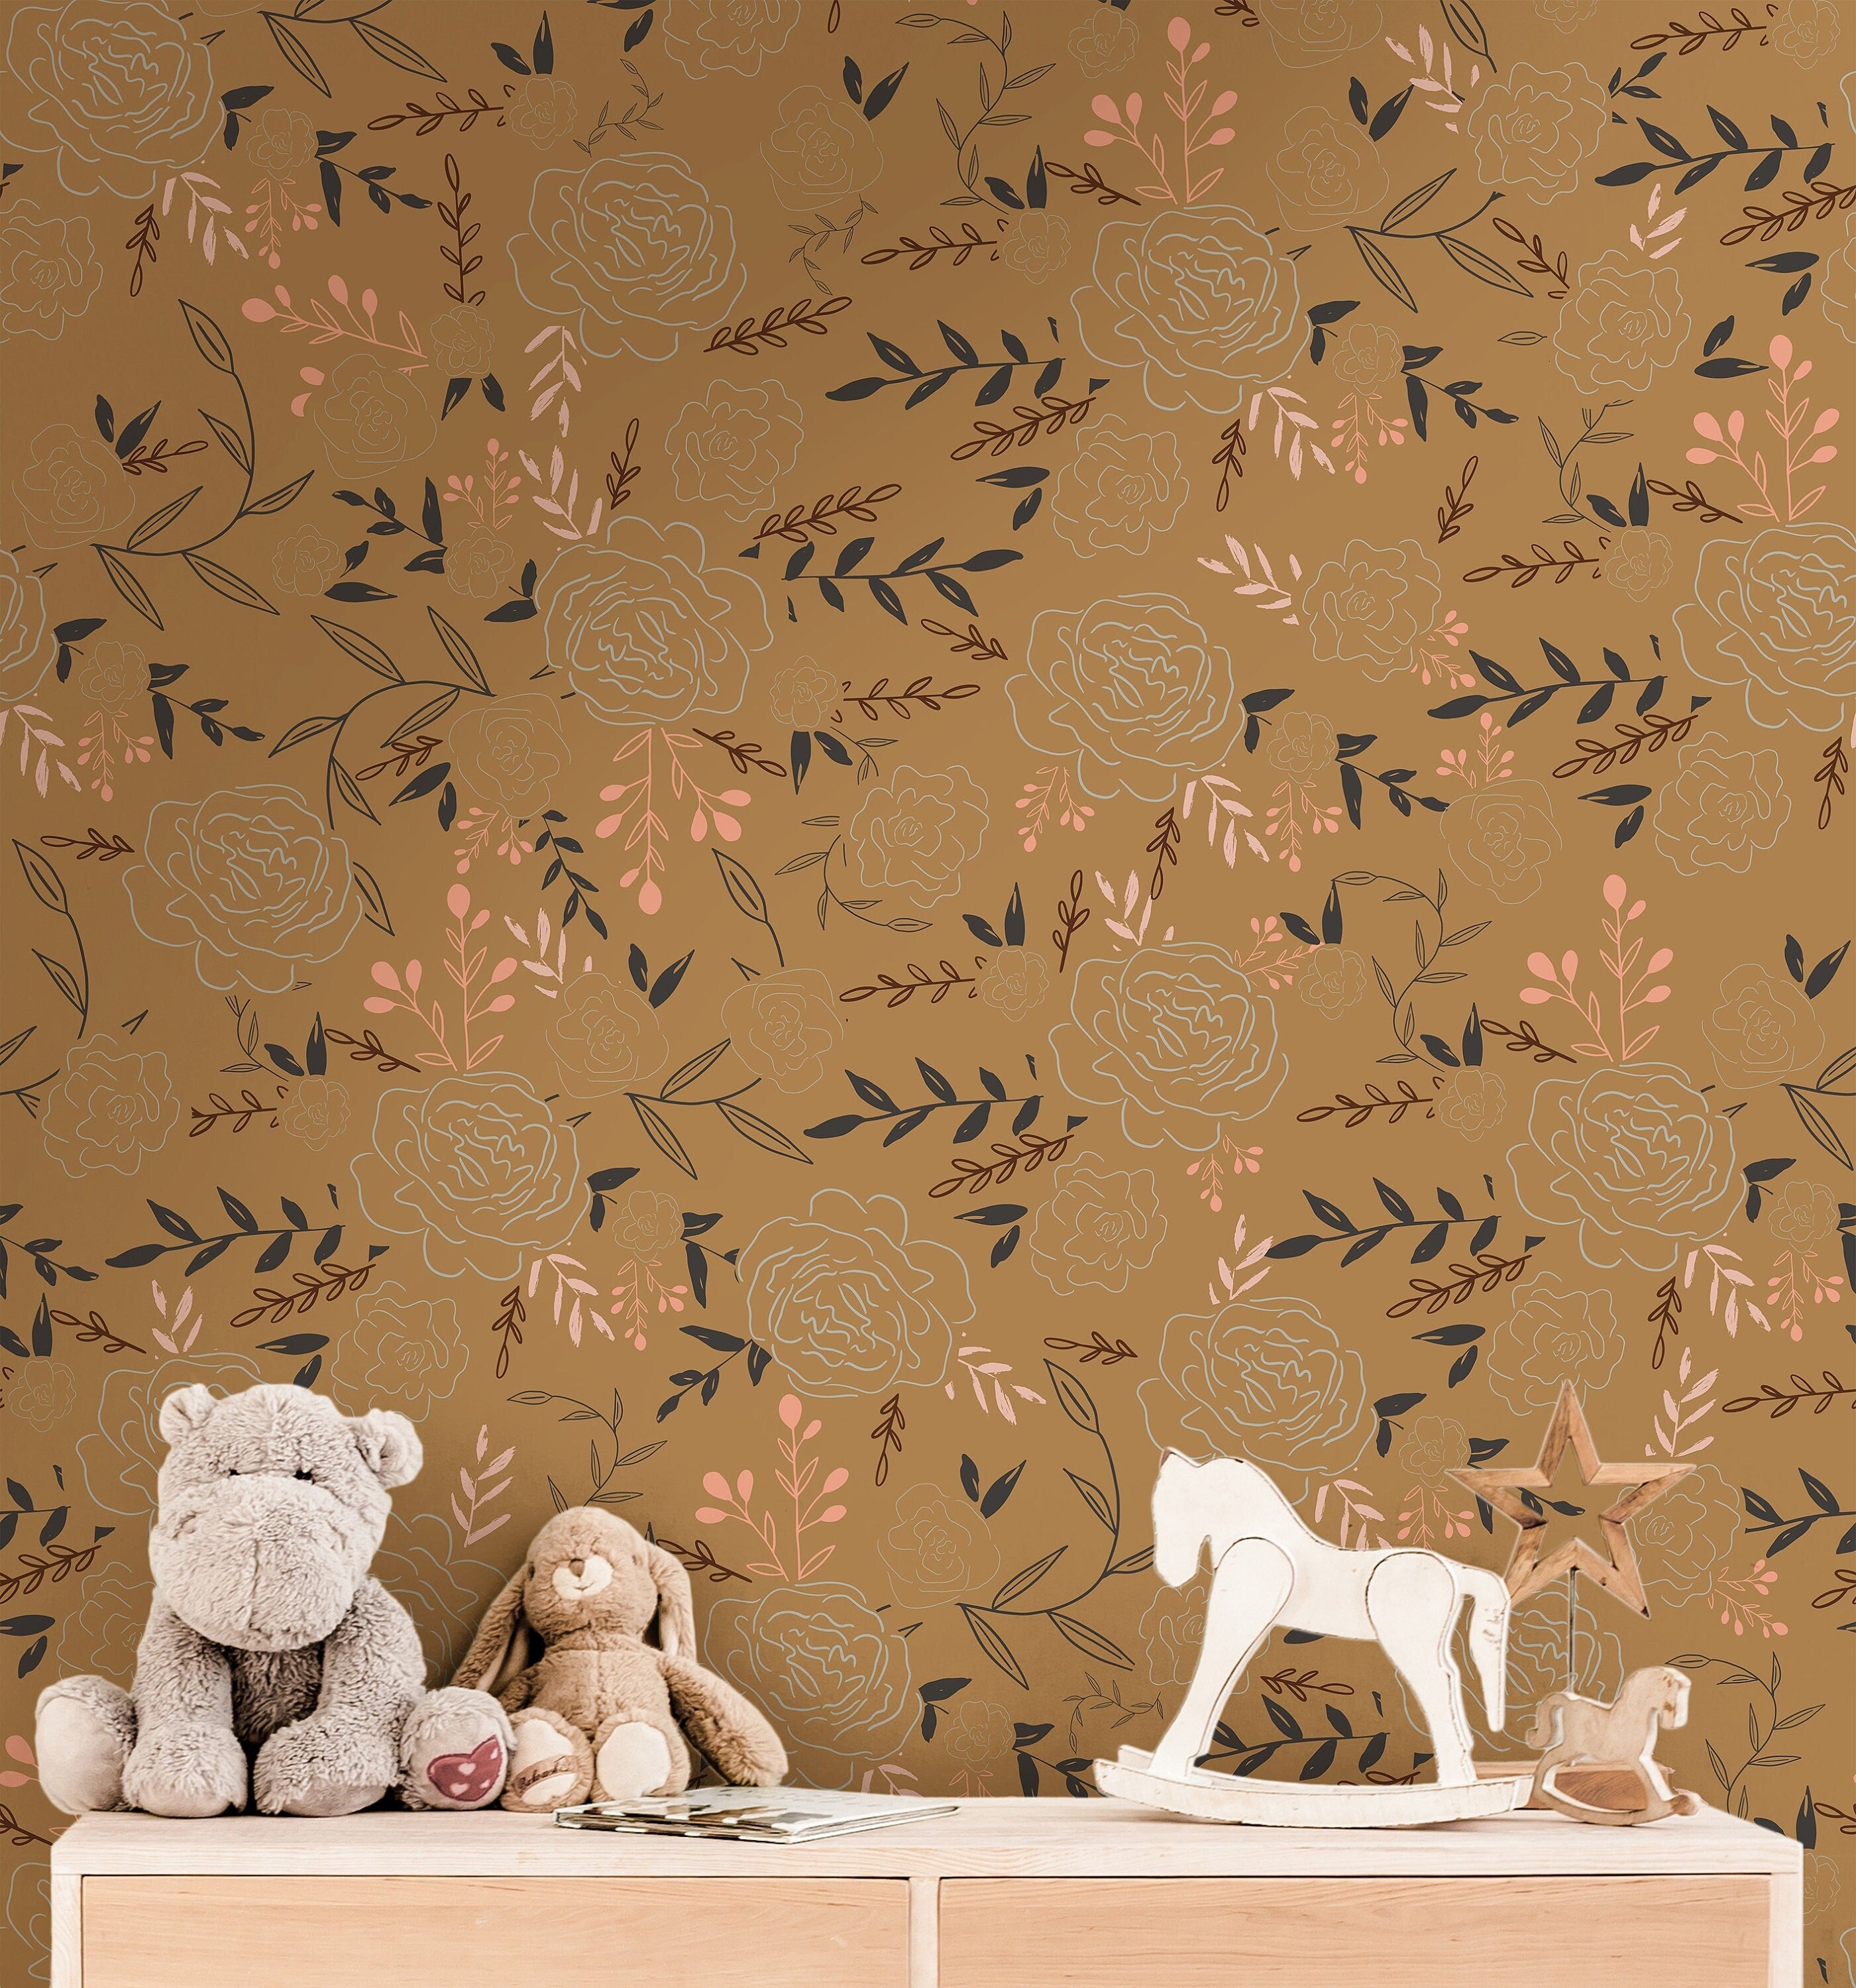 Boho Wallpaper Leaf Decorative Adhesive Contact Paper for Nursery